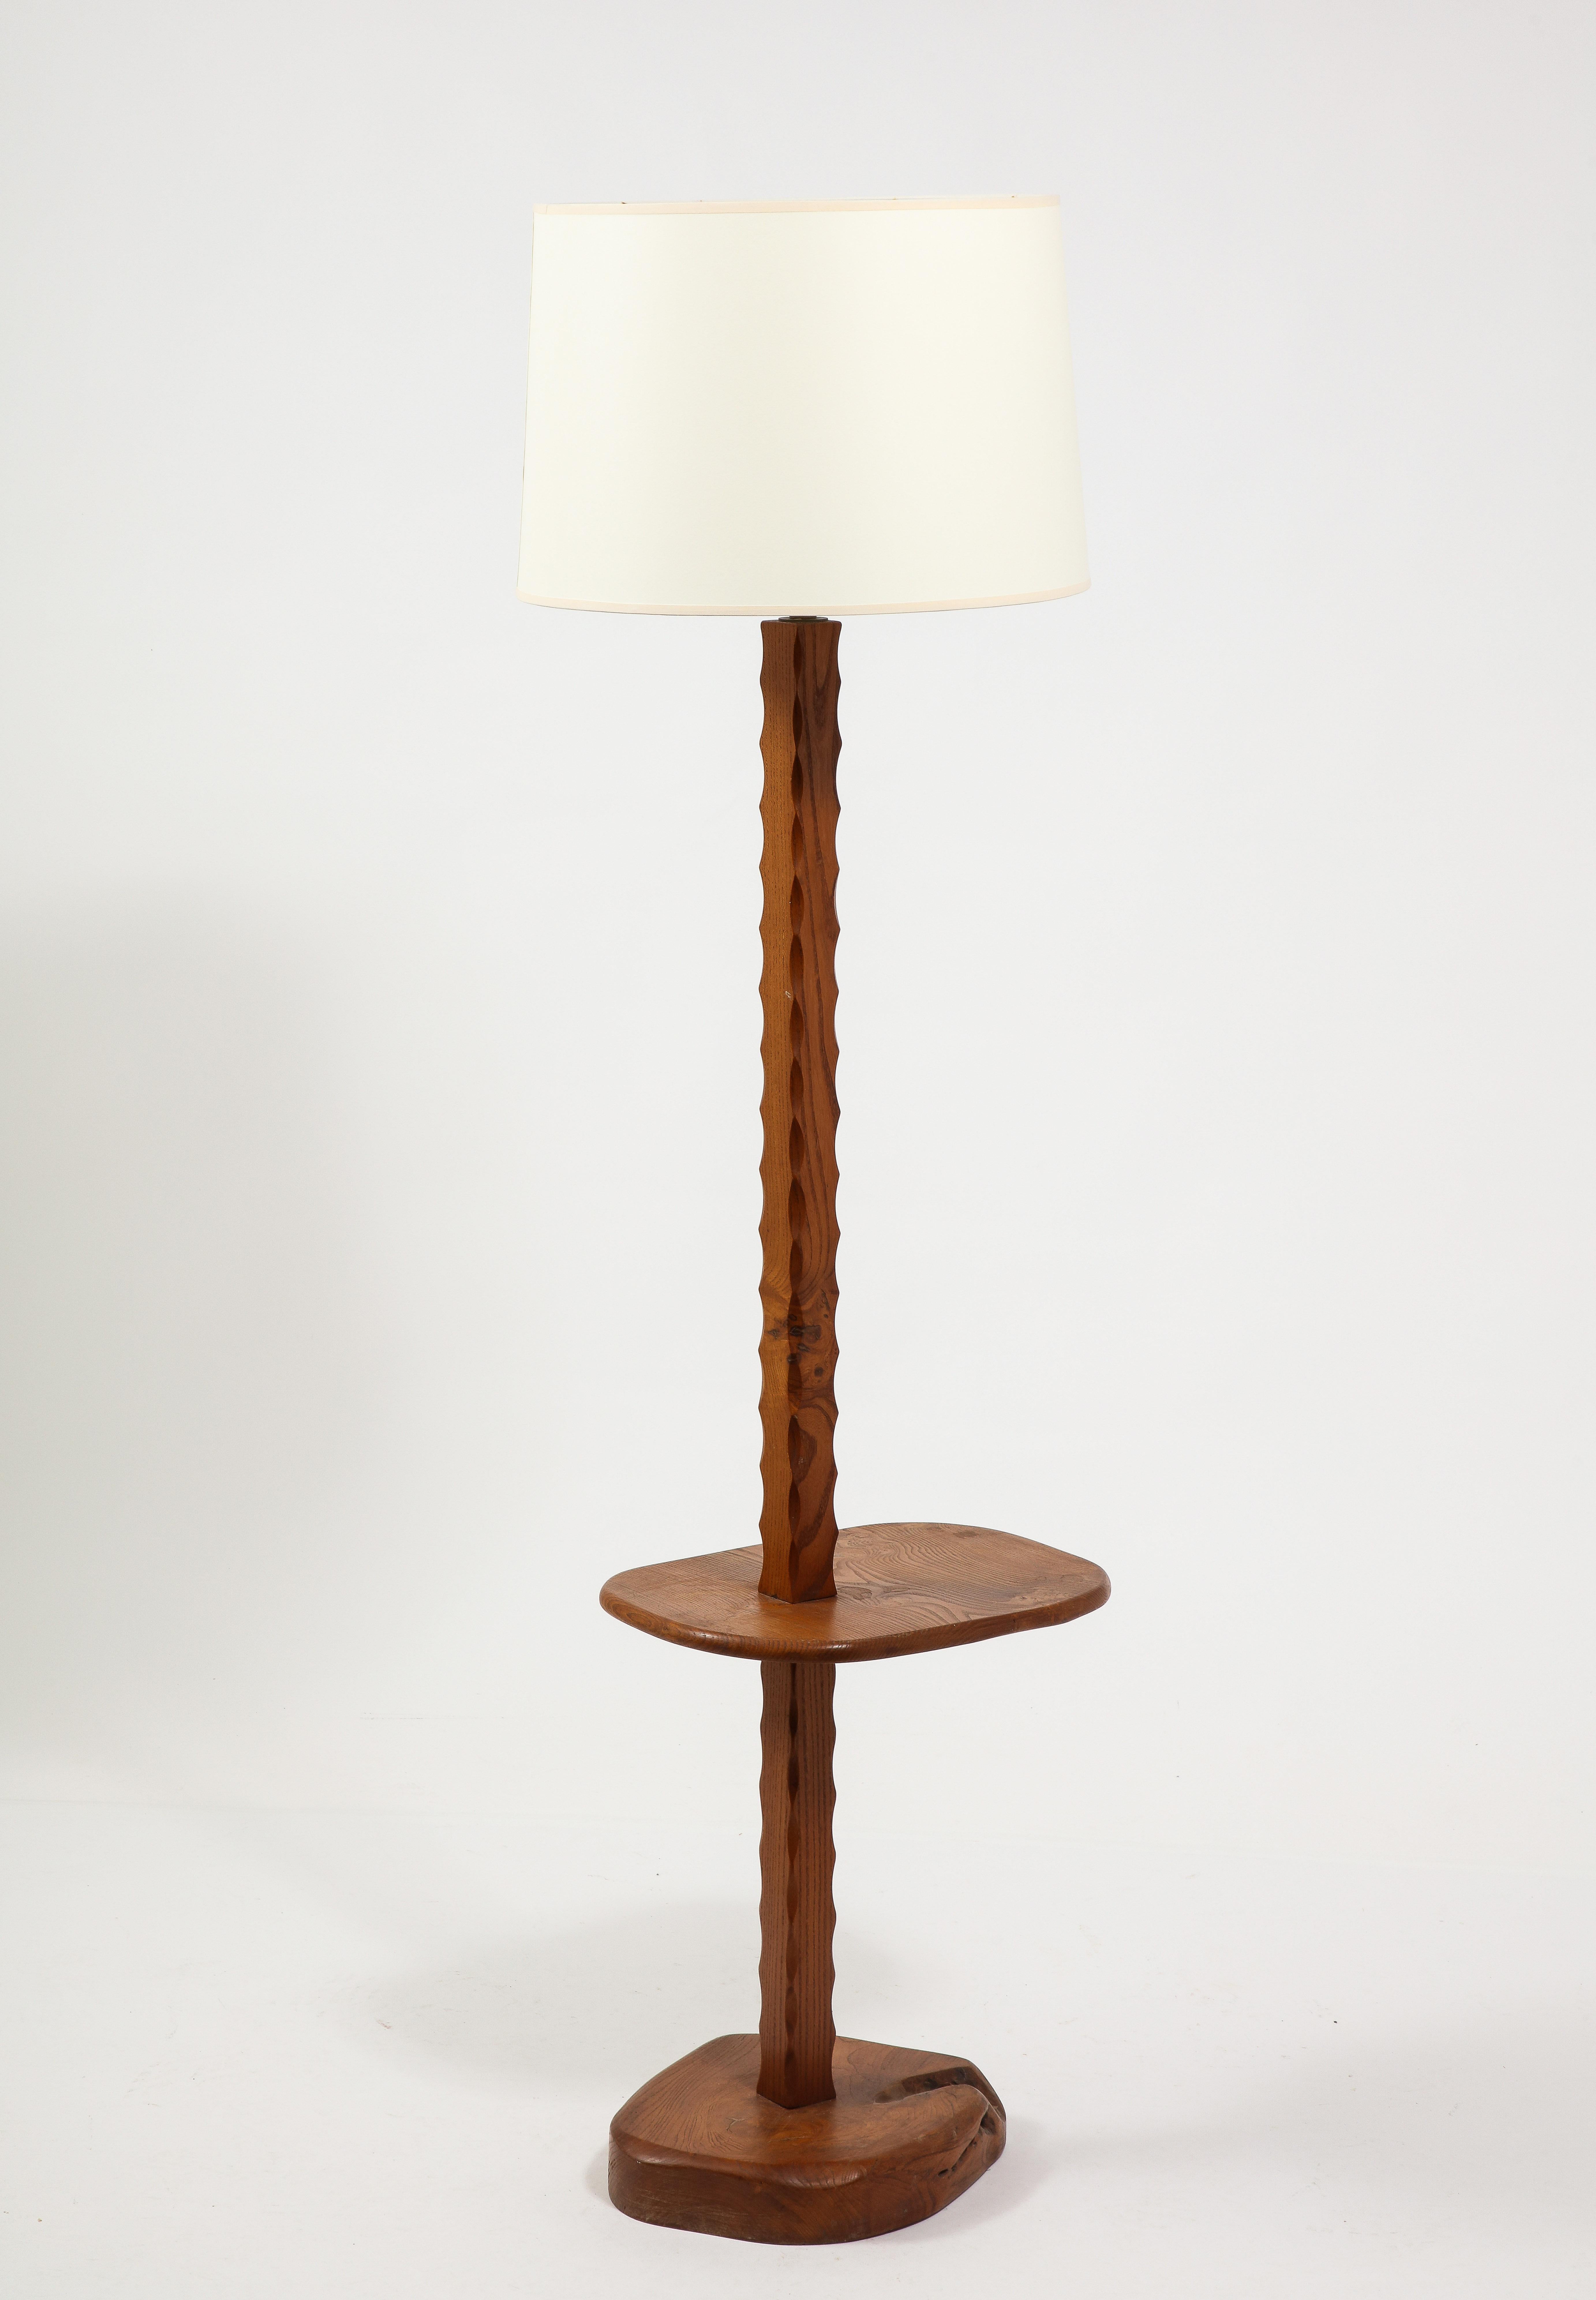 Solid Elm Floor Lamp With Shelf, France 1950's For Sale 2